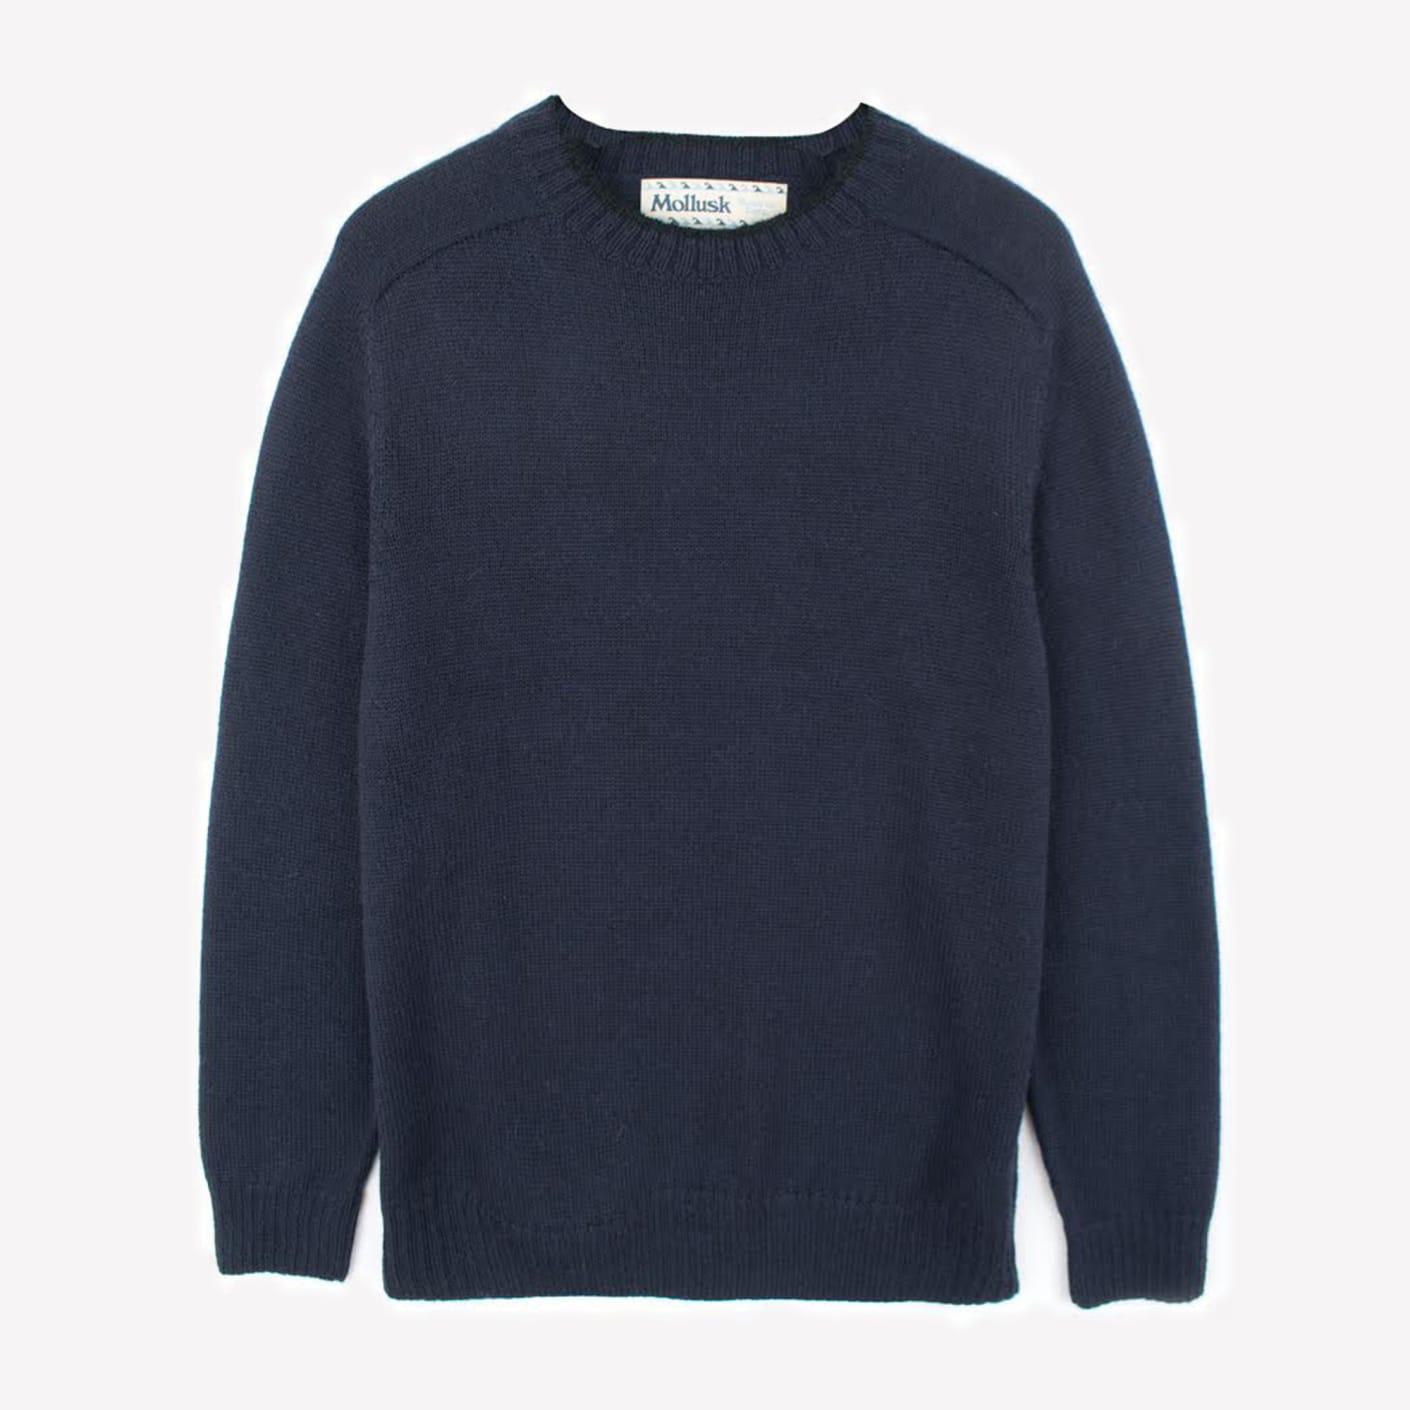 Mollusk Surf Shop Tipped Sweater | Bespoke Post